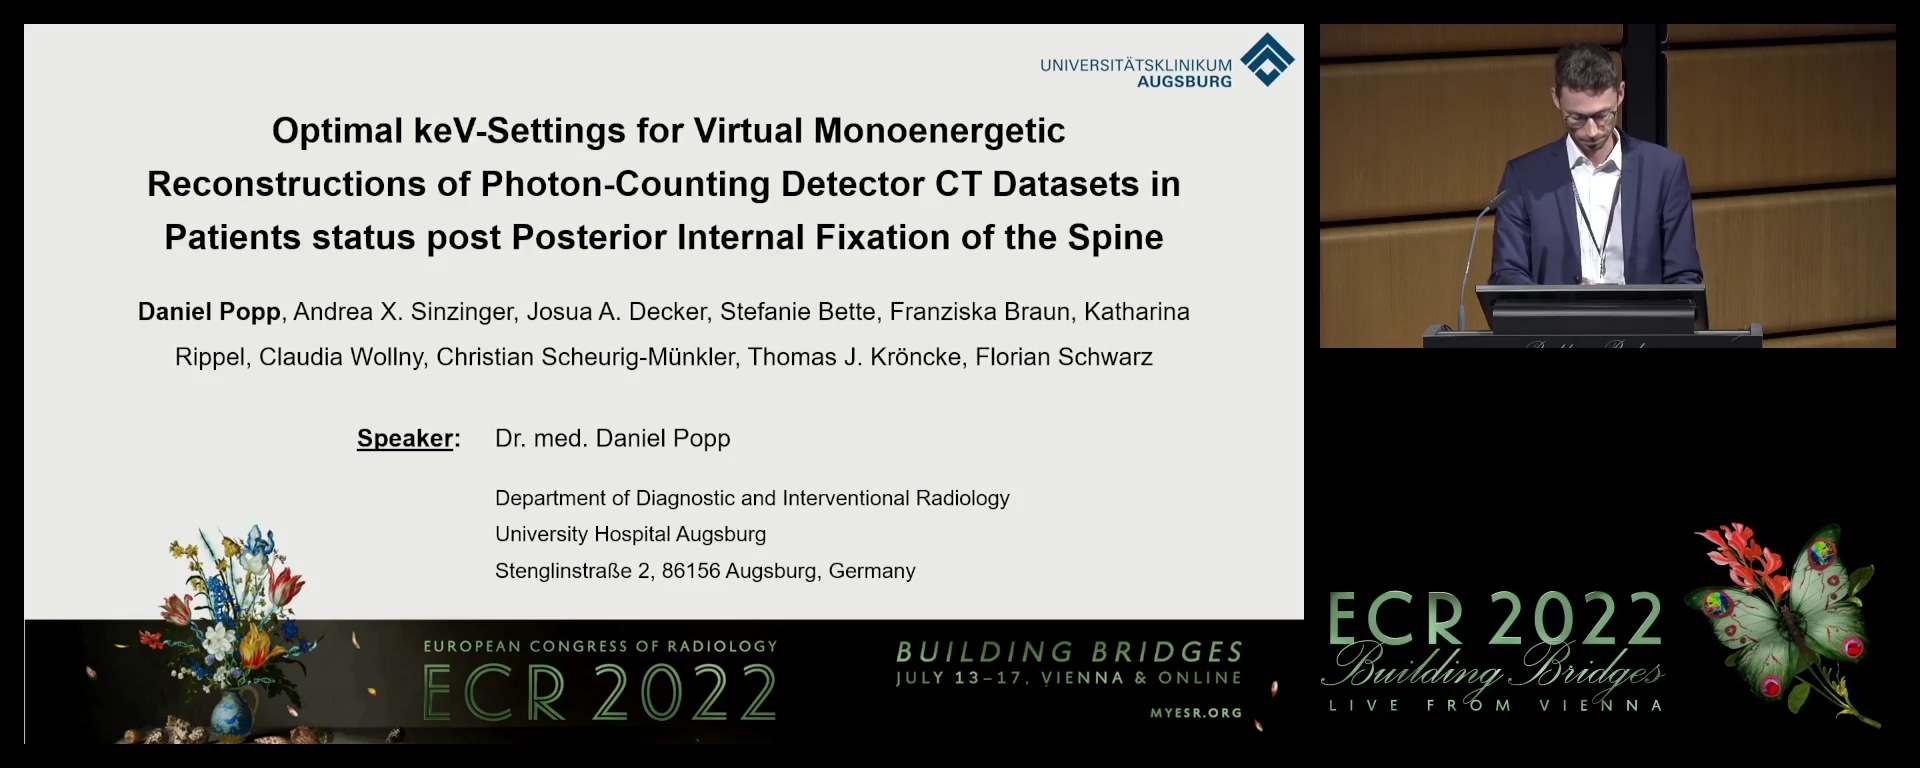 Optimal keV-settings for virtual monoenergetic reconstructions of photon-counting detector CT datasets in patients status post posterior internal fixation of the spine